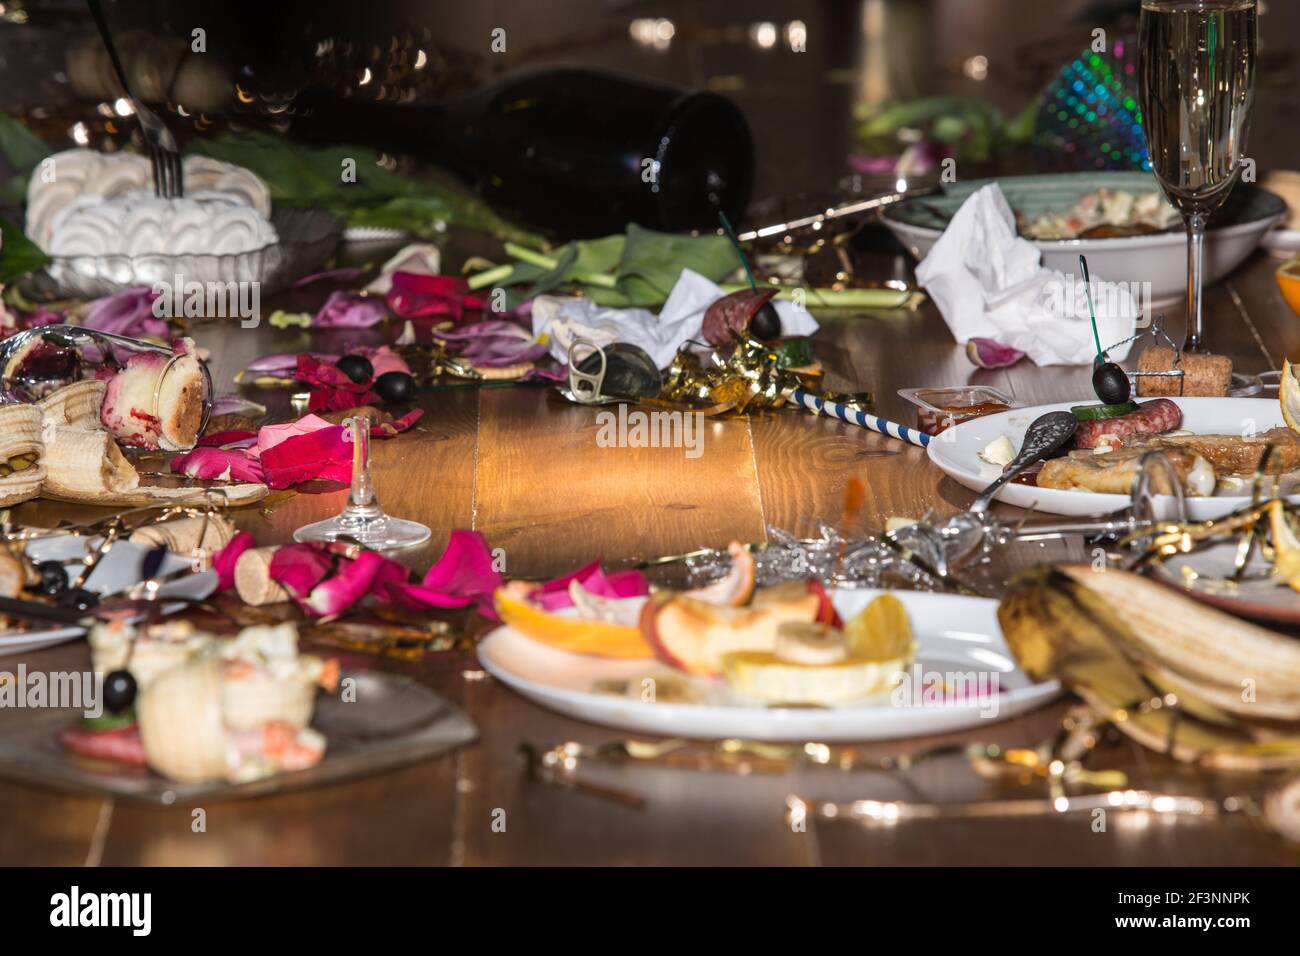 Early morning after the party. Glasses and plates on the table with confetti and serpentine, leftovers, flower petals Stock Photo